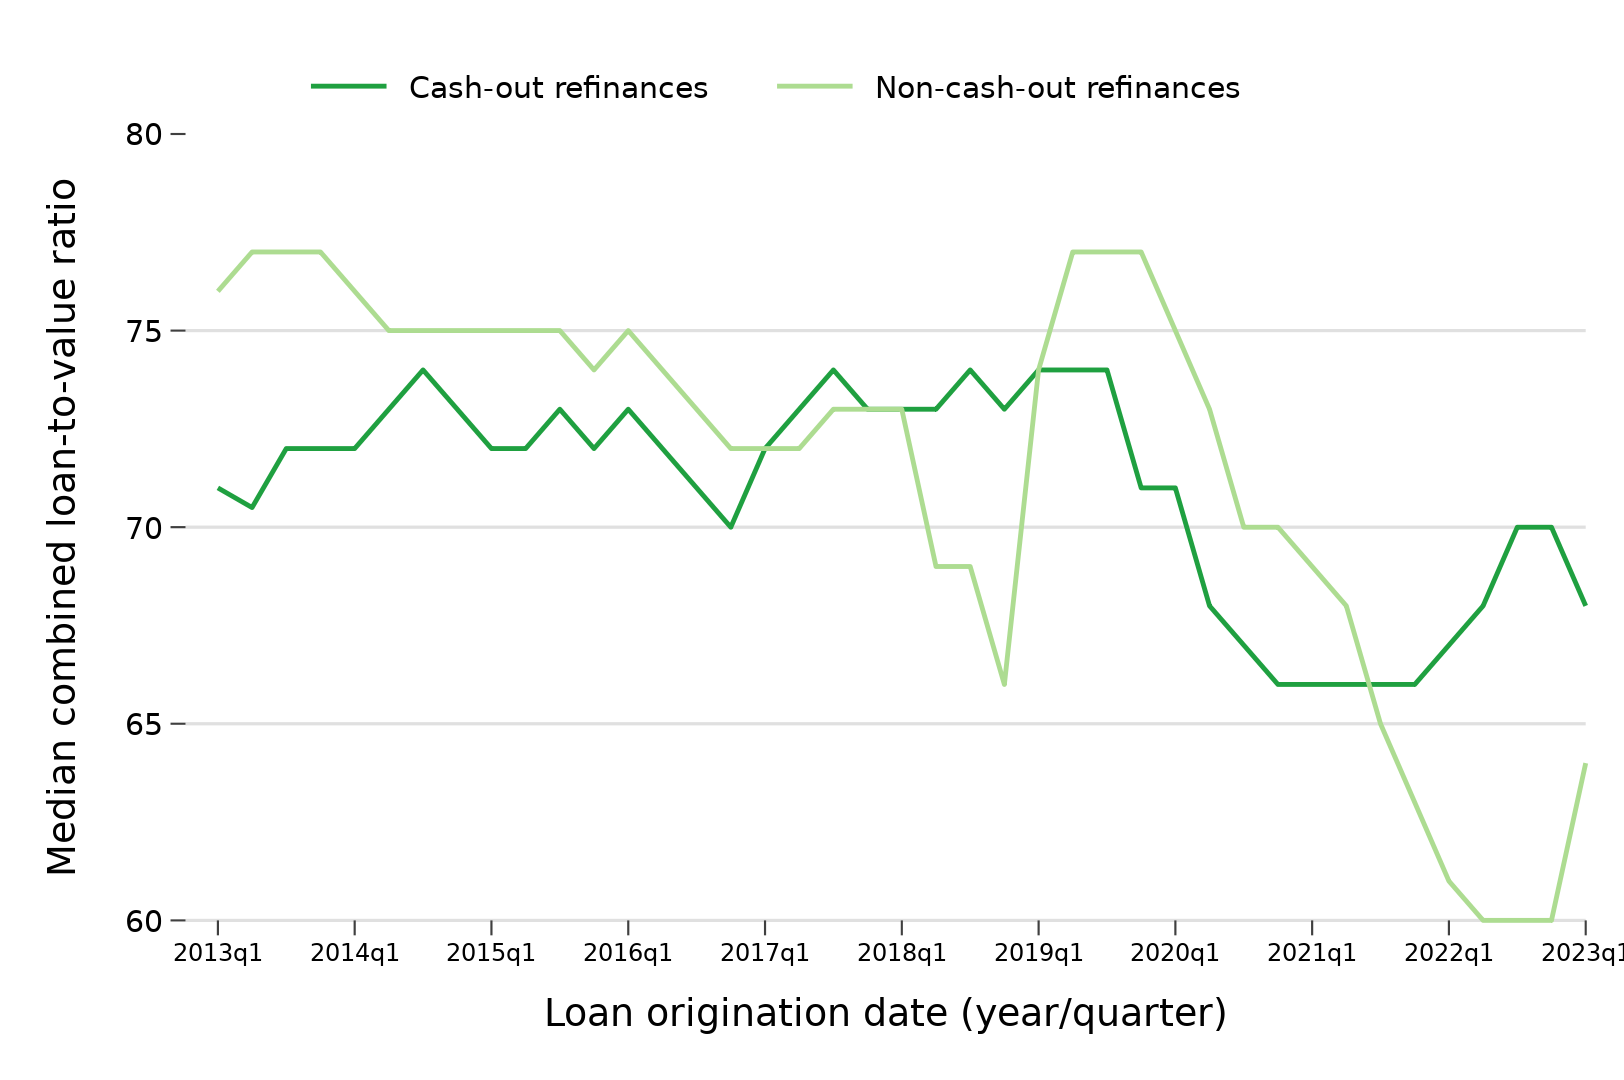 Line graph showing median combined loan-to-value ratios at origination for cash-out refinance mortgages and non-cash-out refinance mortgages, by quarter, from the first quarter of 2013 to the first quarter of 2023. The median combined loan-to-value ratios for cash-out refinances are generally similar to or lower than non-cash-out refinances originated in the same period, except during high interest rate periods from 2017 to 2019 and 2022 to 2023, when median combined loan-to-value ratios for cash-out refinances are relatively higher than non-cash-out refinances.